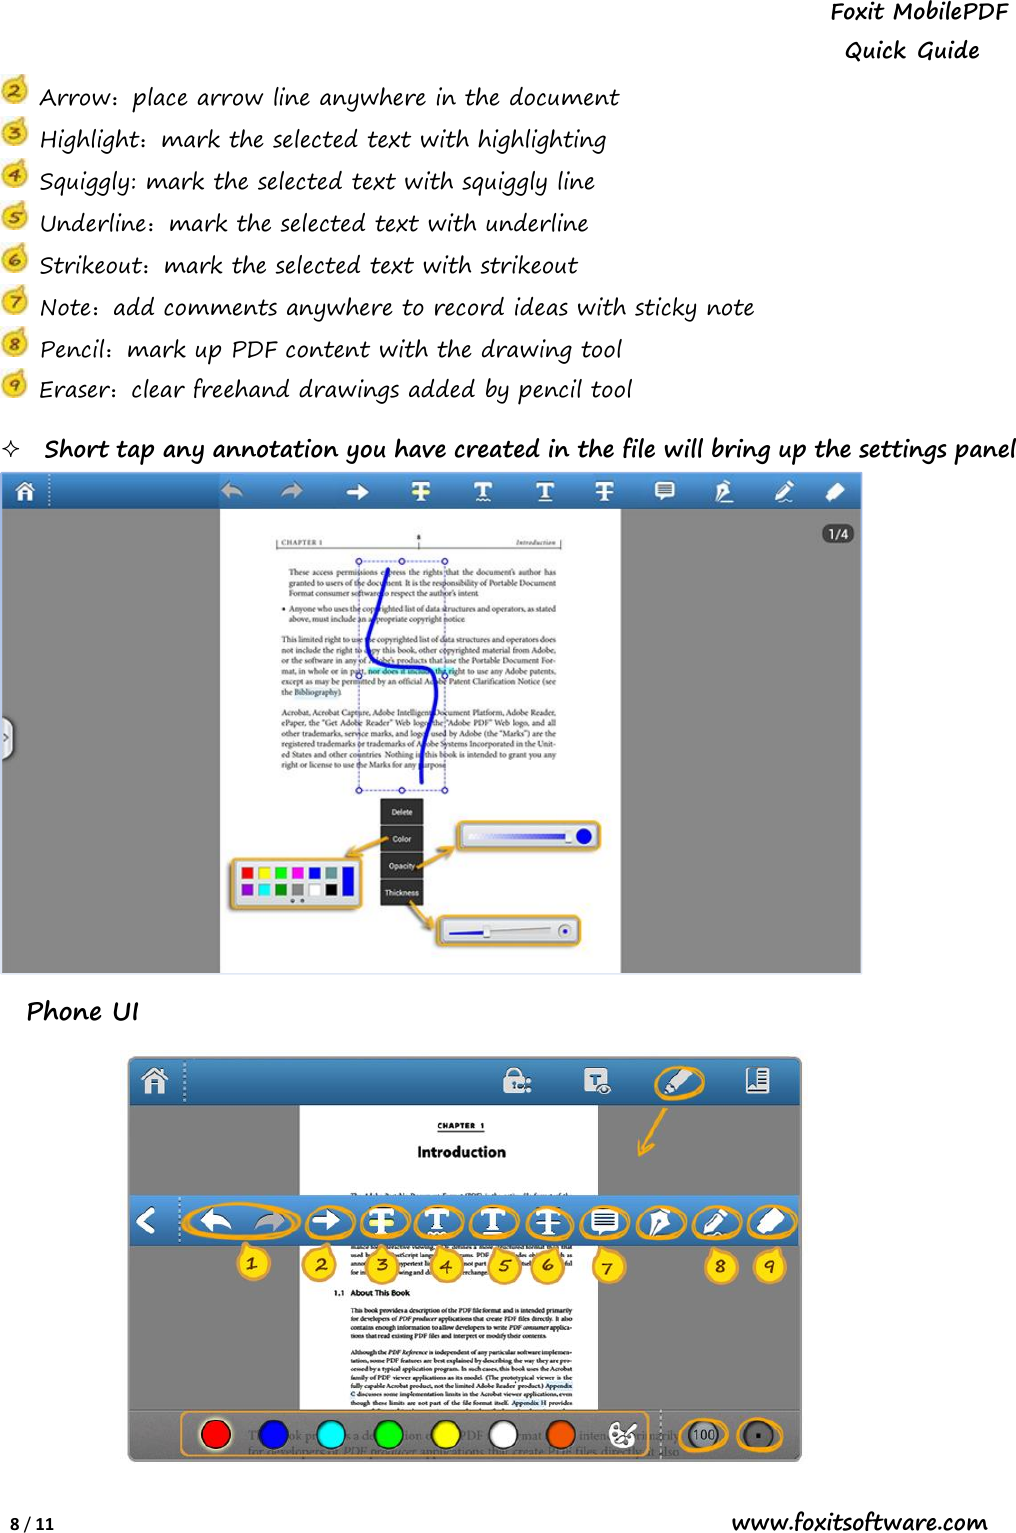 Page 8 of 11 - Foxit  Mobile PDF With RMS For Android - Quick Guide PDFWith RMSfor Um En